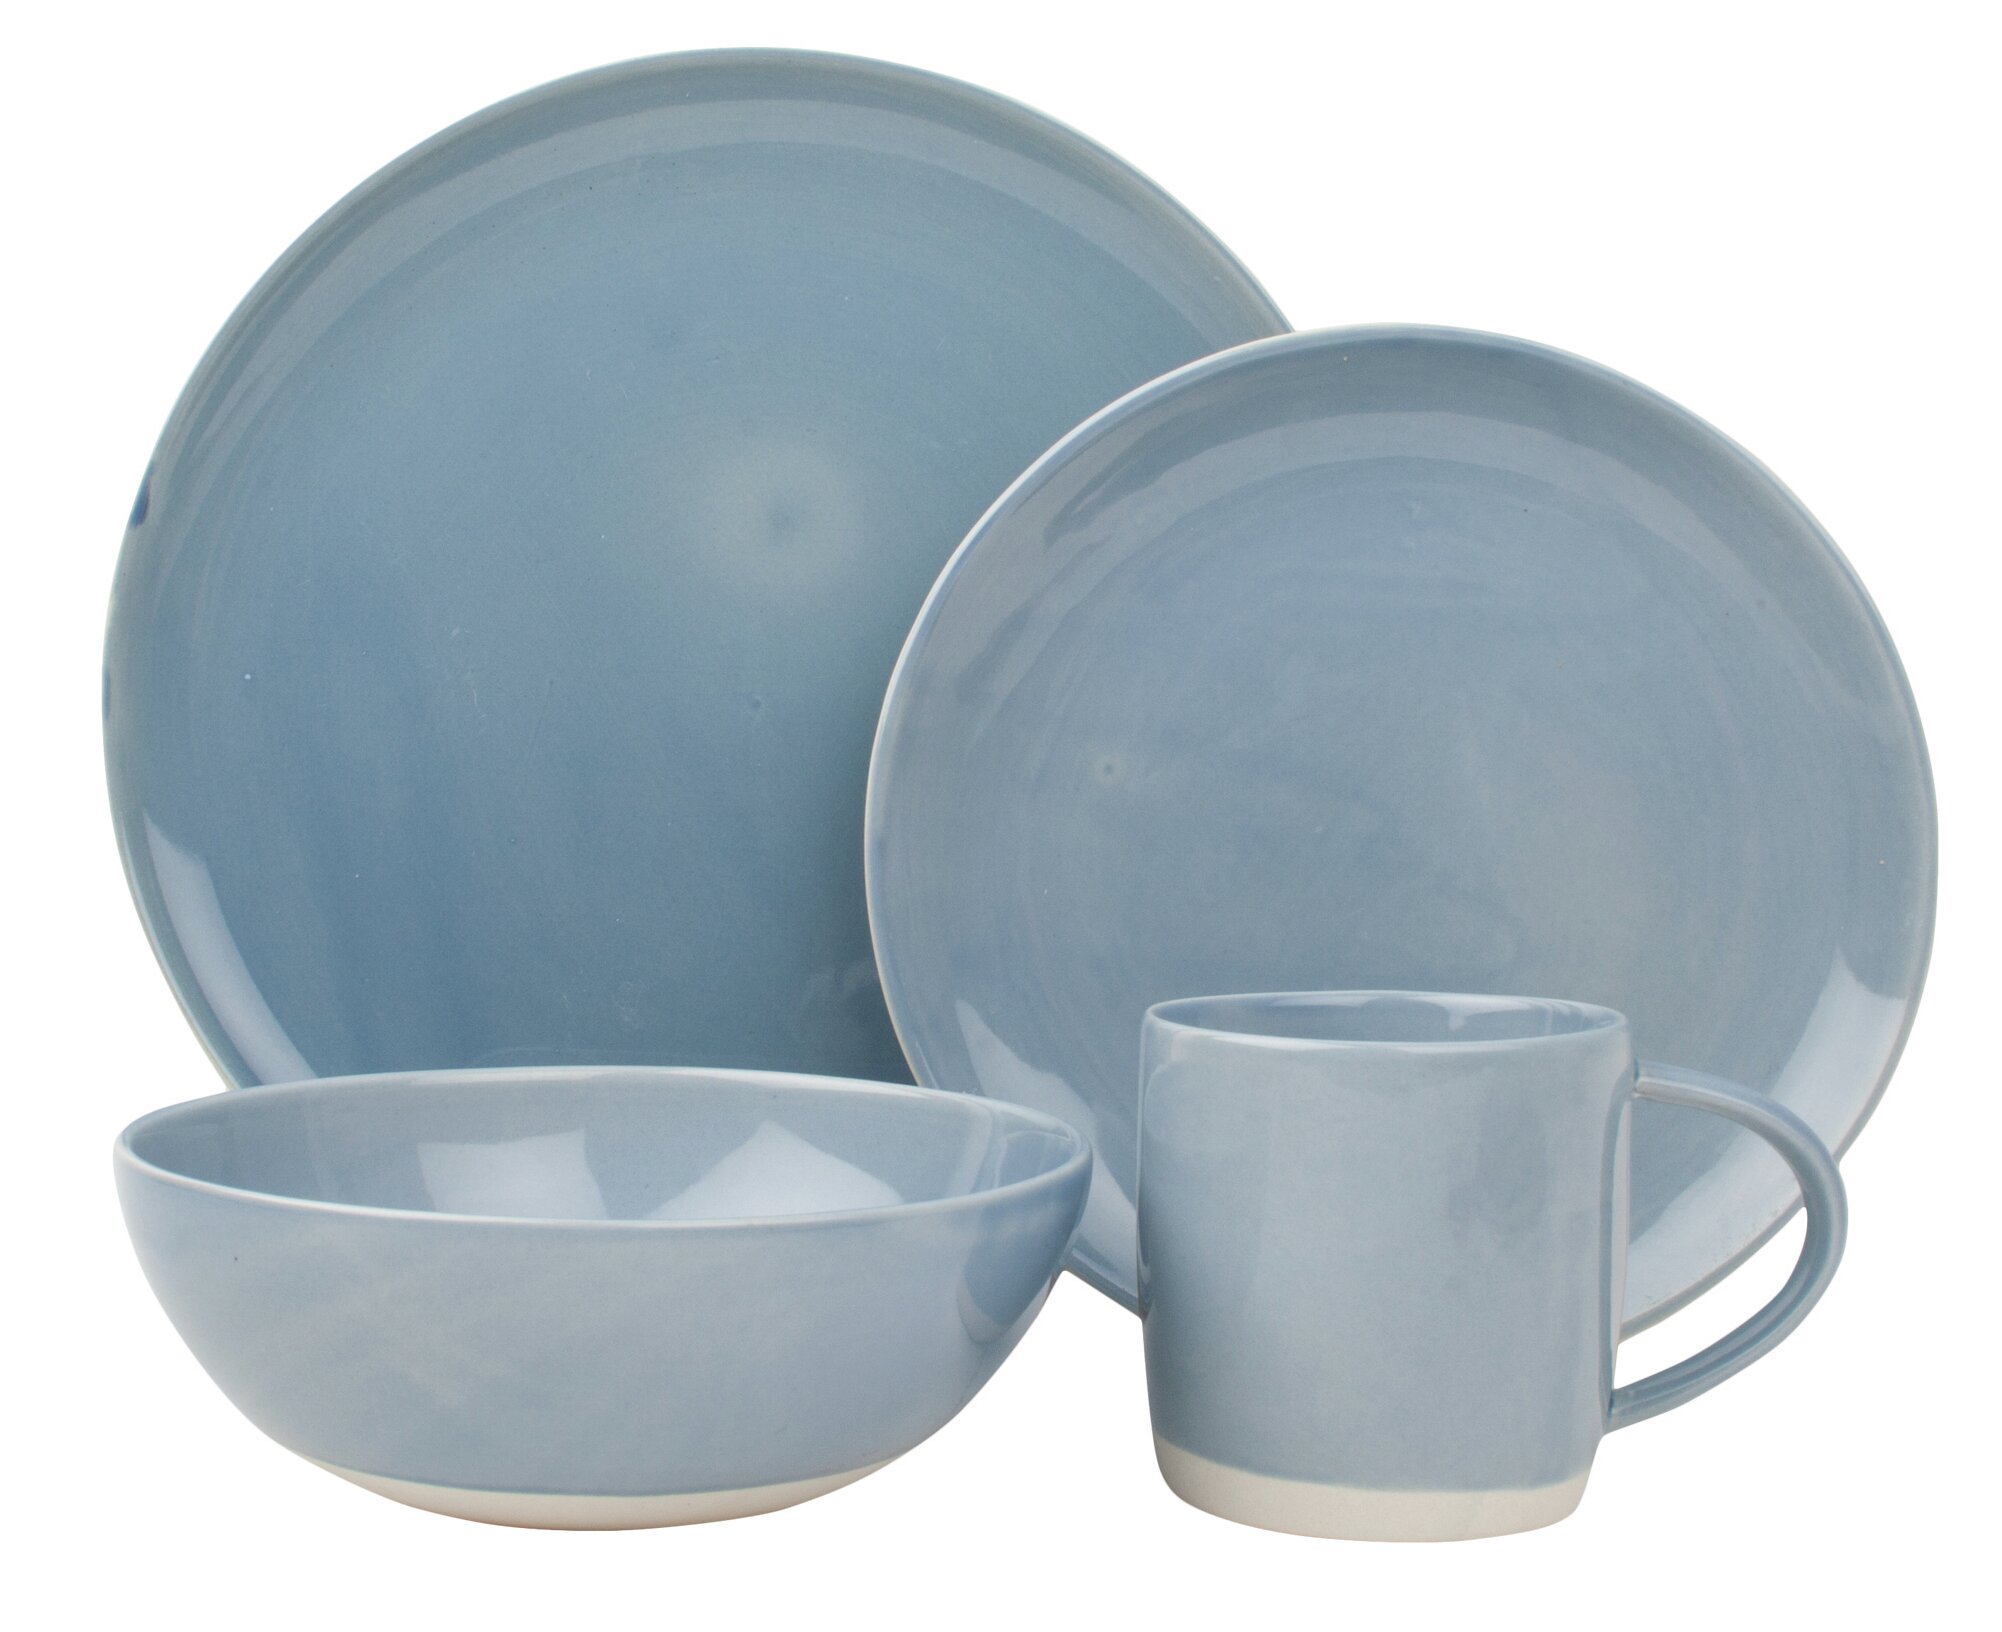 Canvas Home Shell Bisque Porcelain China Dinnerware Set